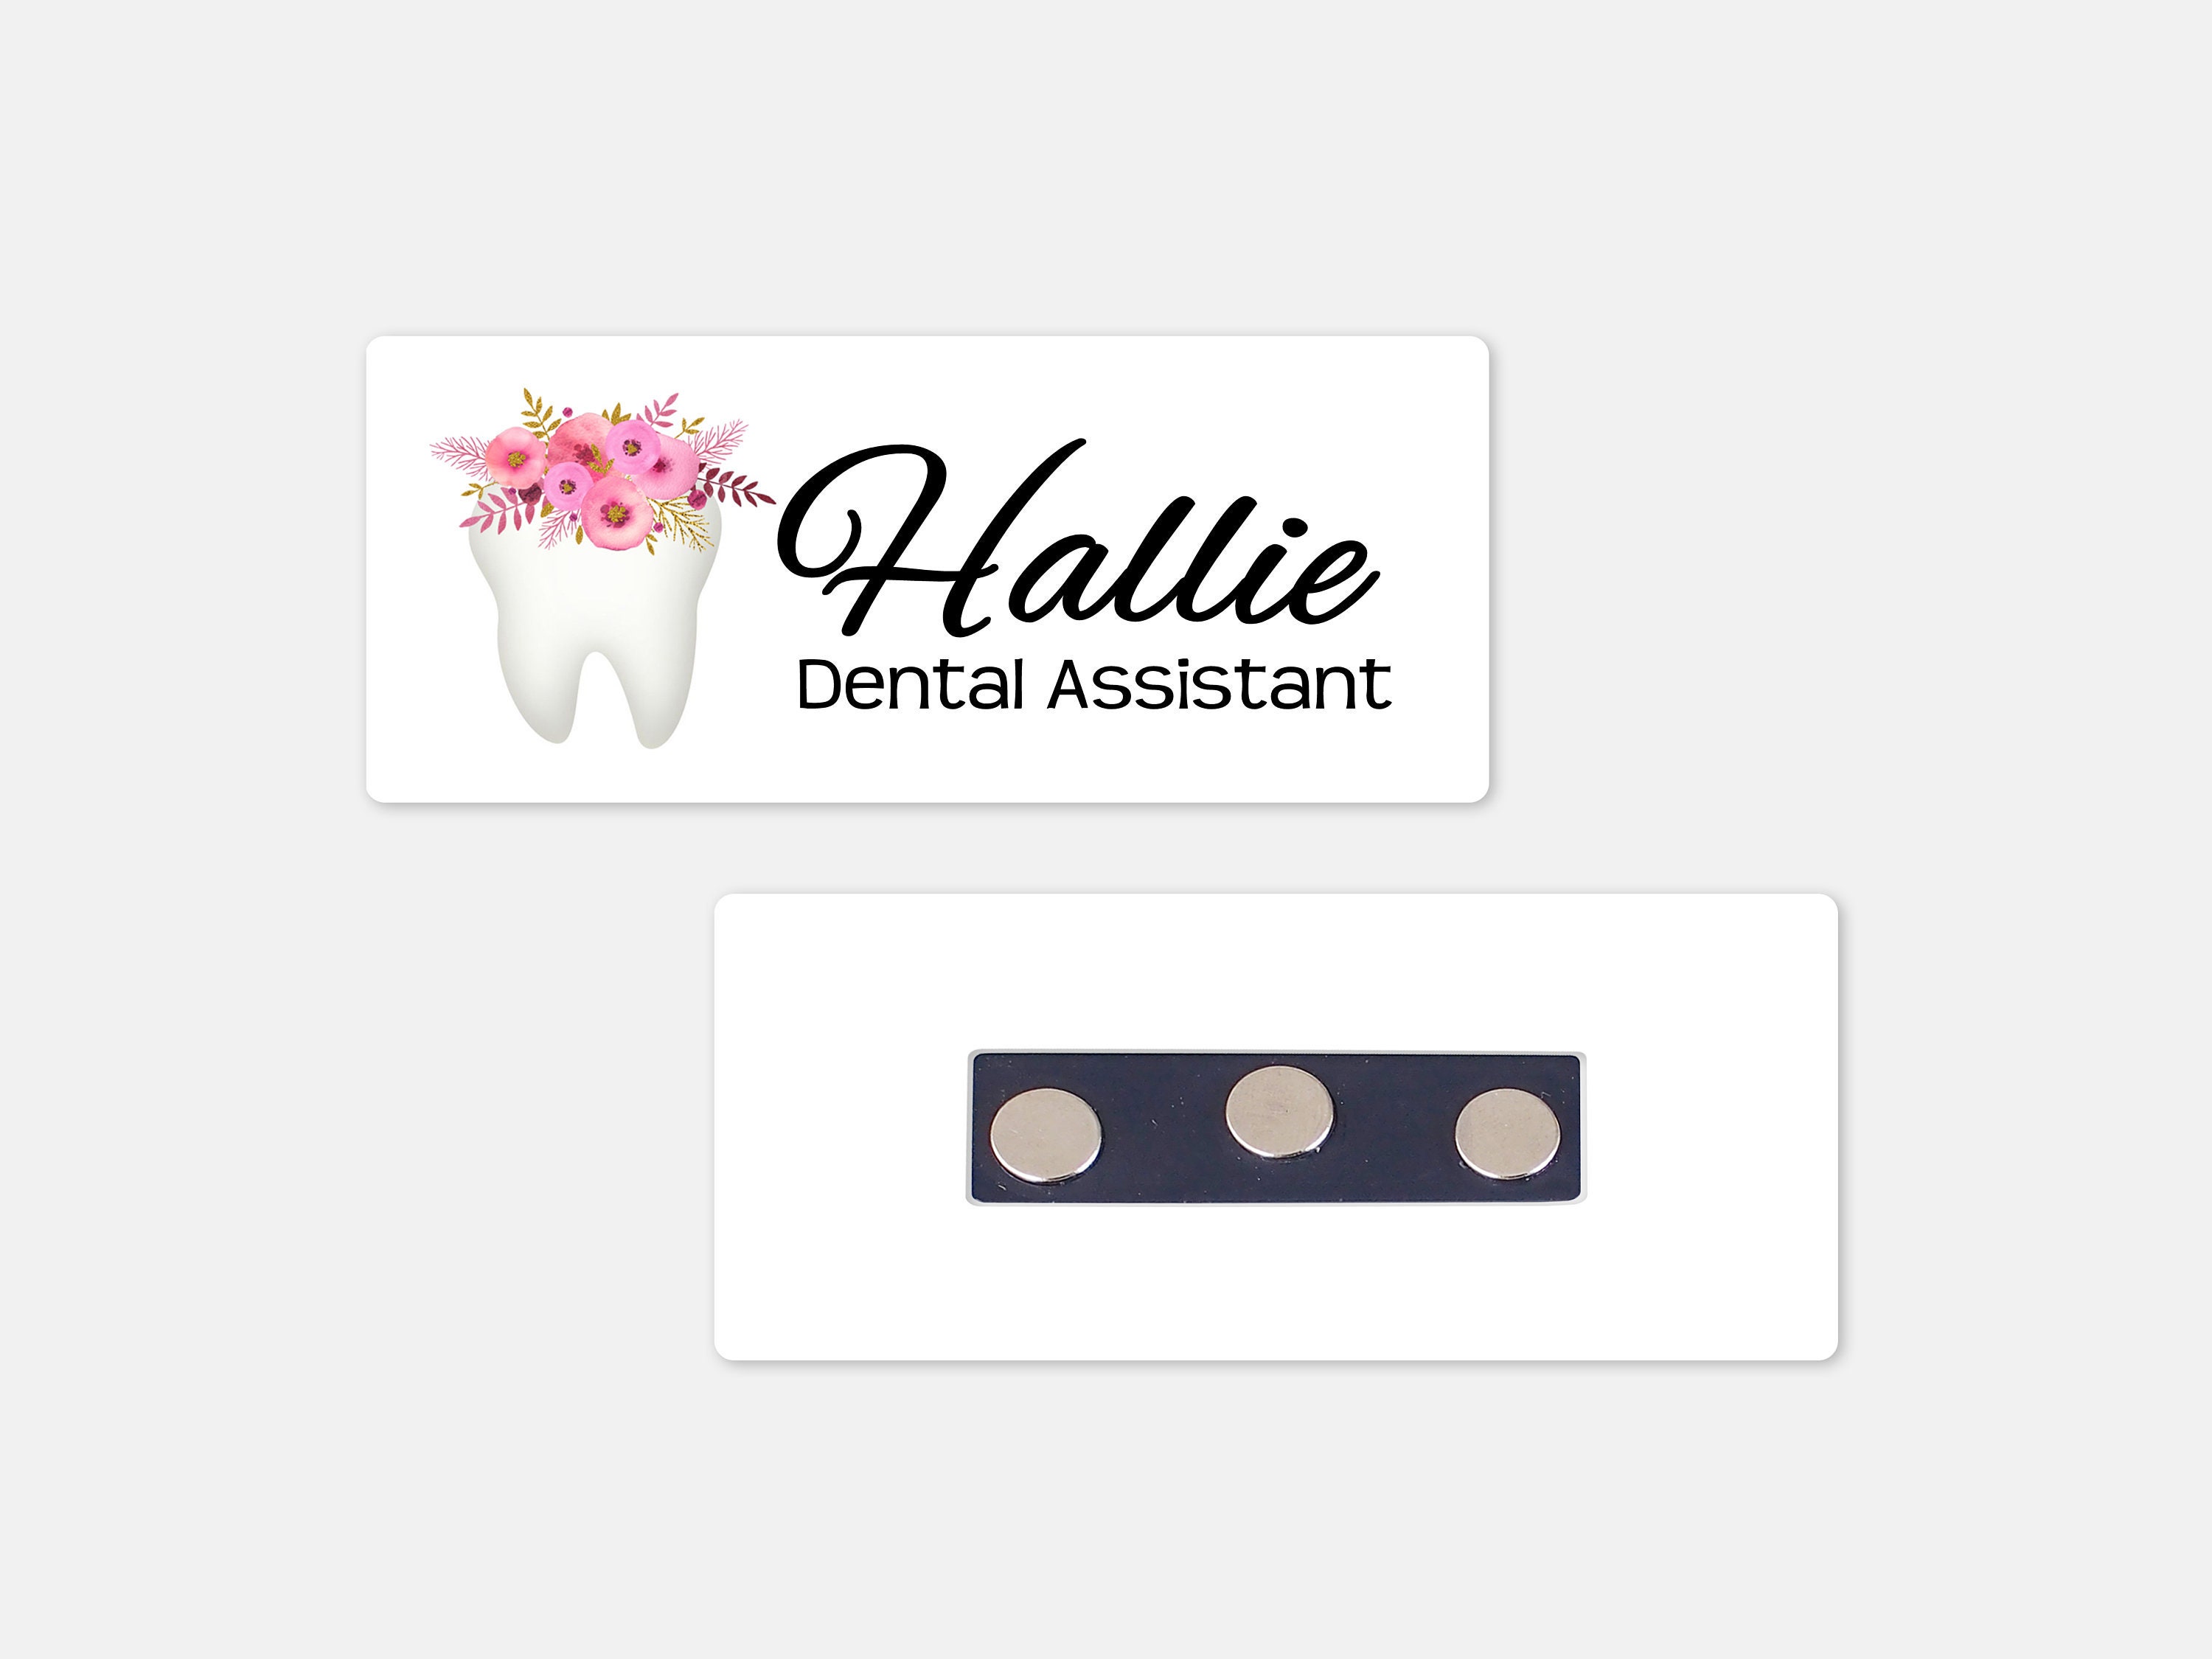 Personalized Magnetic Name Badge / Floral Tooth White / Custom Name Tag  1.25 X 3 Magnetic / Dental Office / Dentist / Hygienist -  Singapore